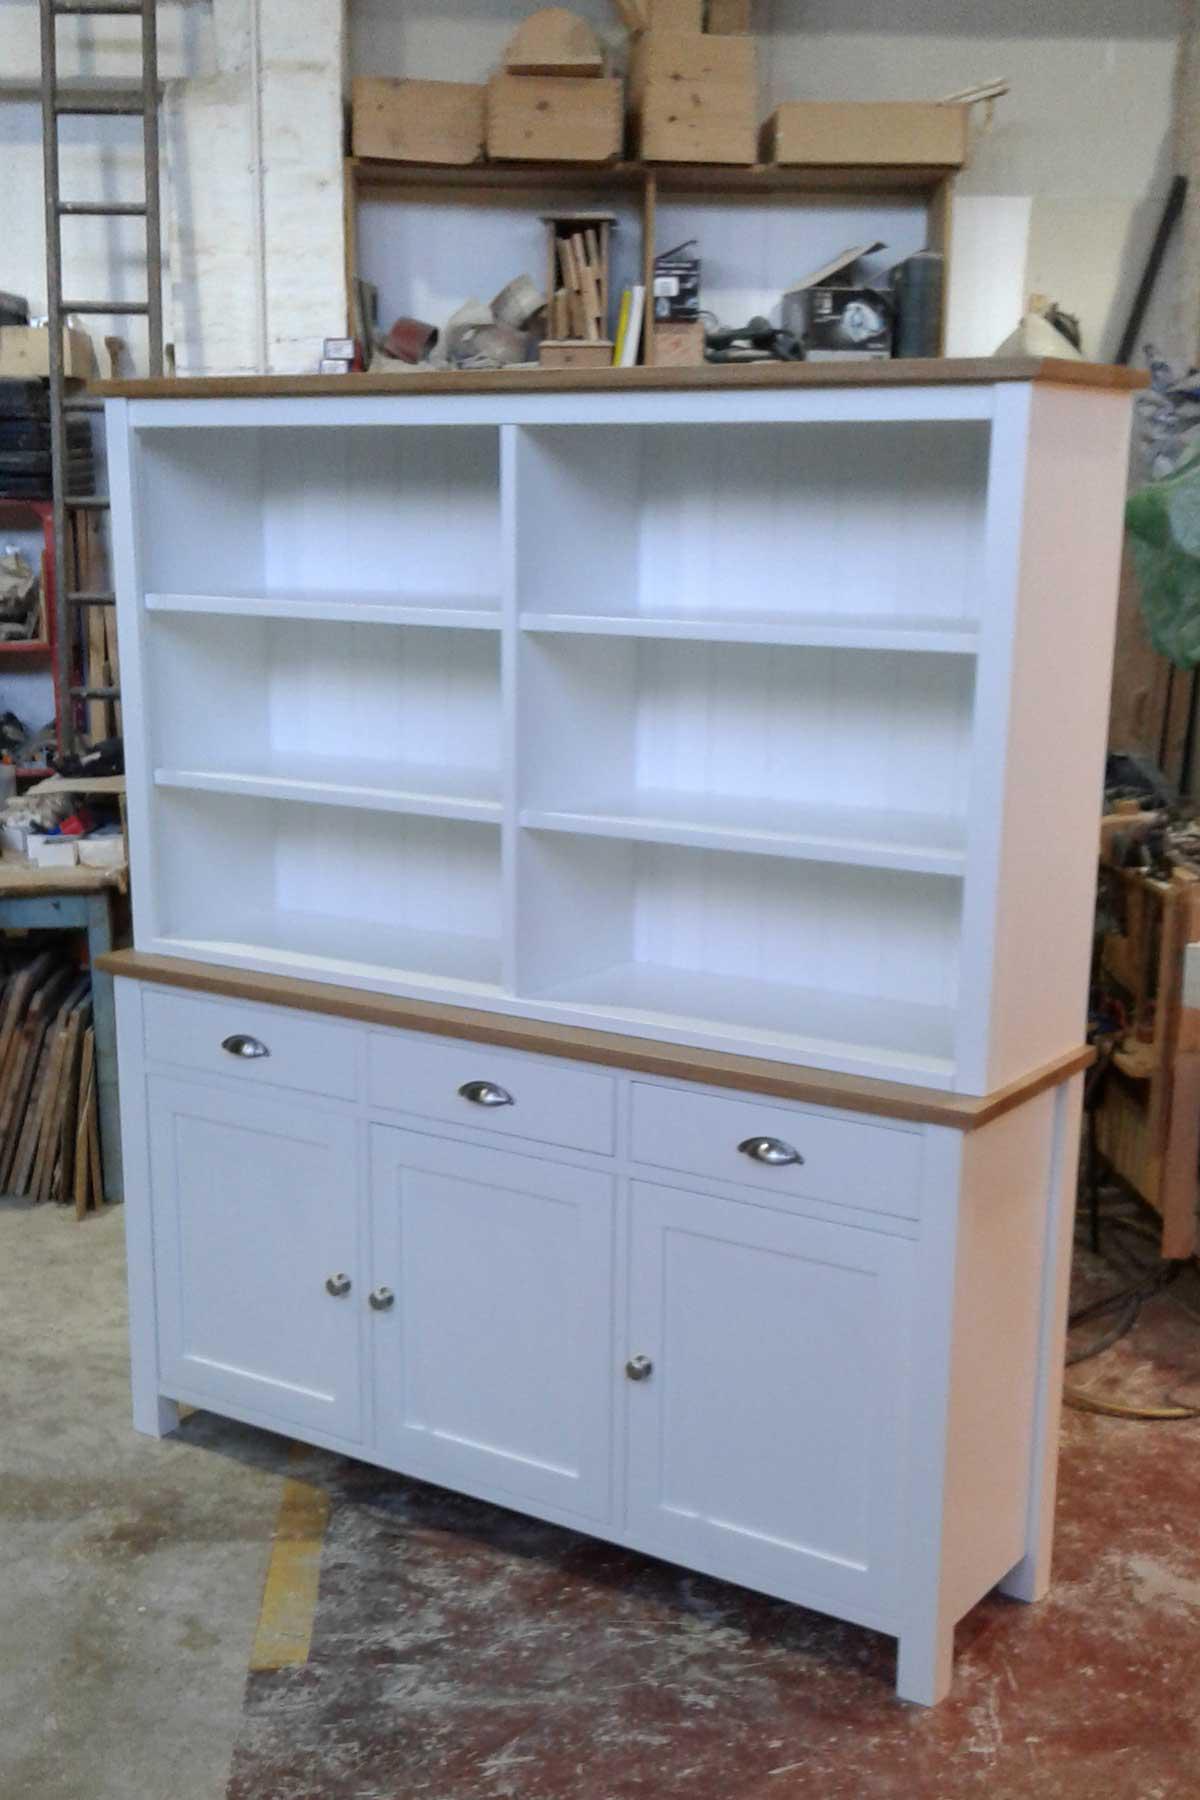 Made-to-measure Painted Kitchen Dressers